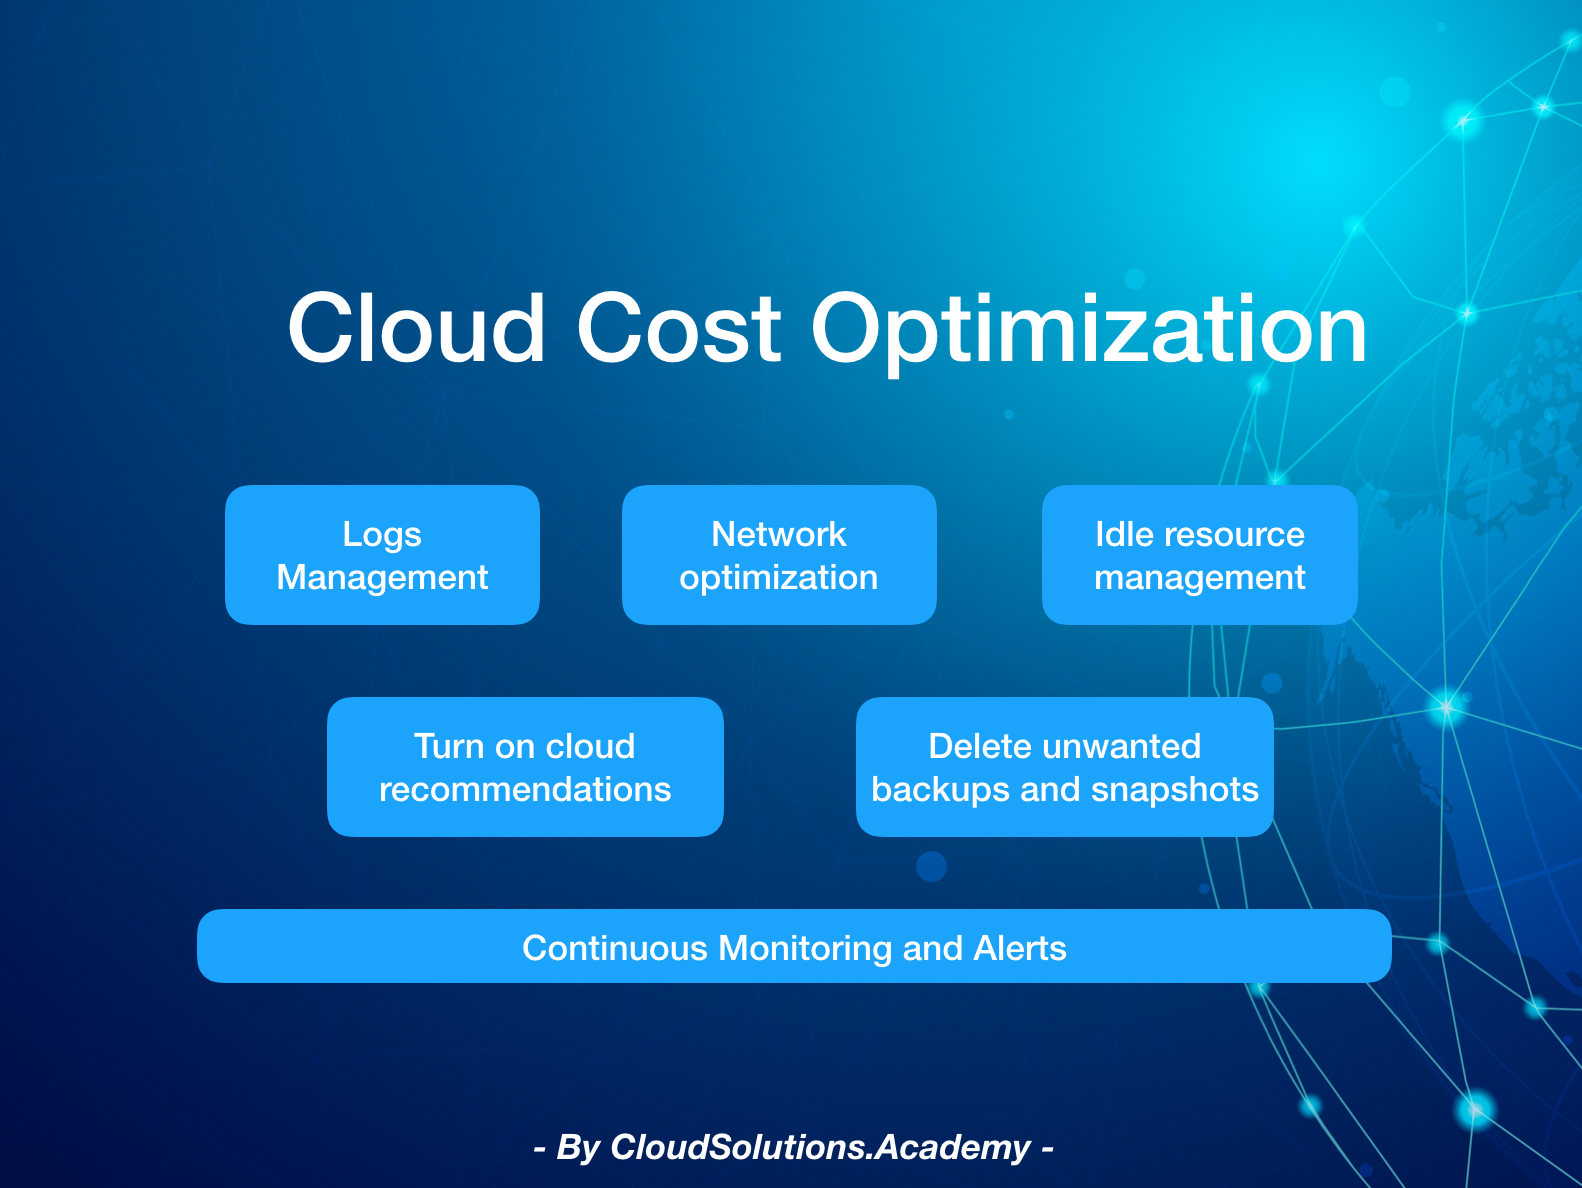 How to Handle Idle Resources in Cloud Cost Management